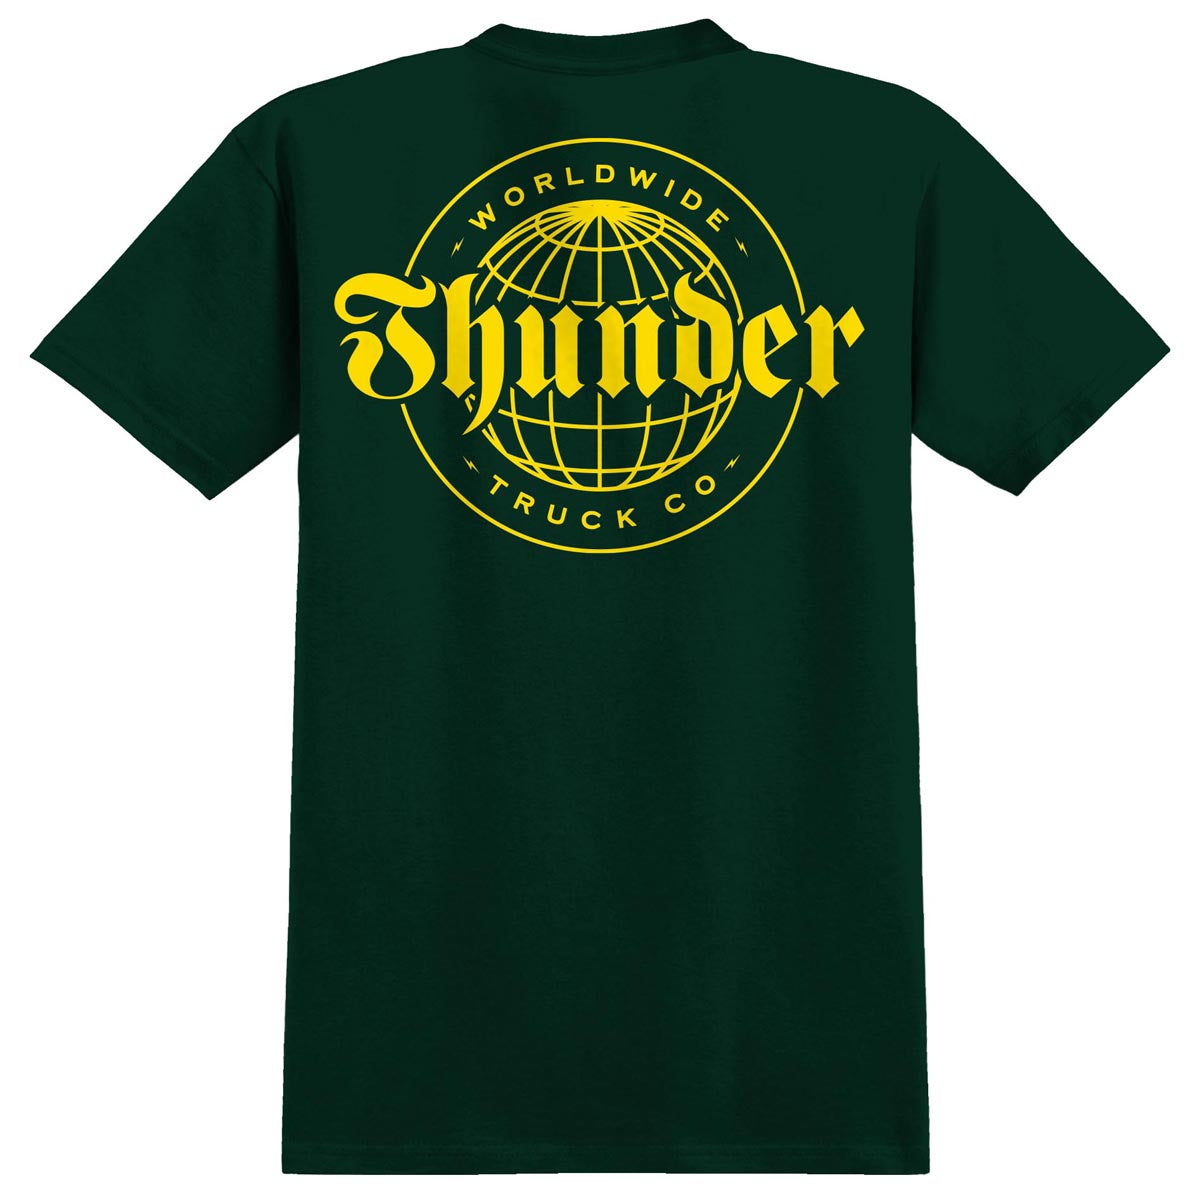 Thunder Worldwide Dbl T-Shirt - Forest Green/Yellow image 1